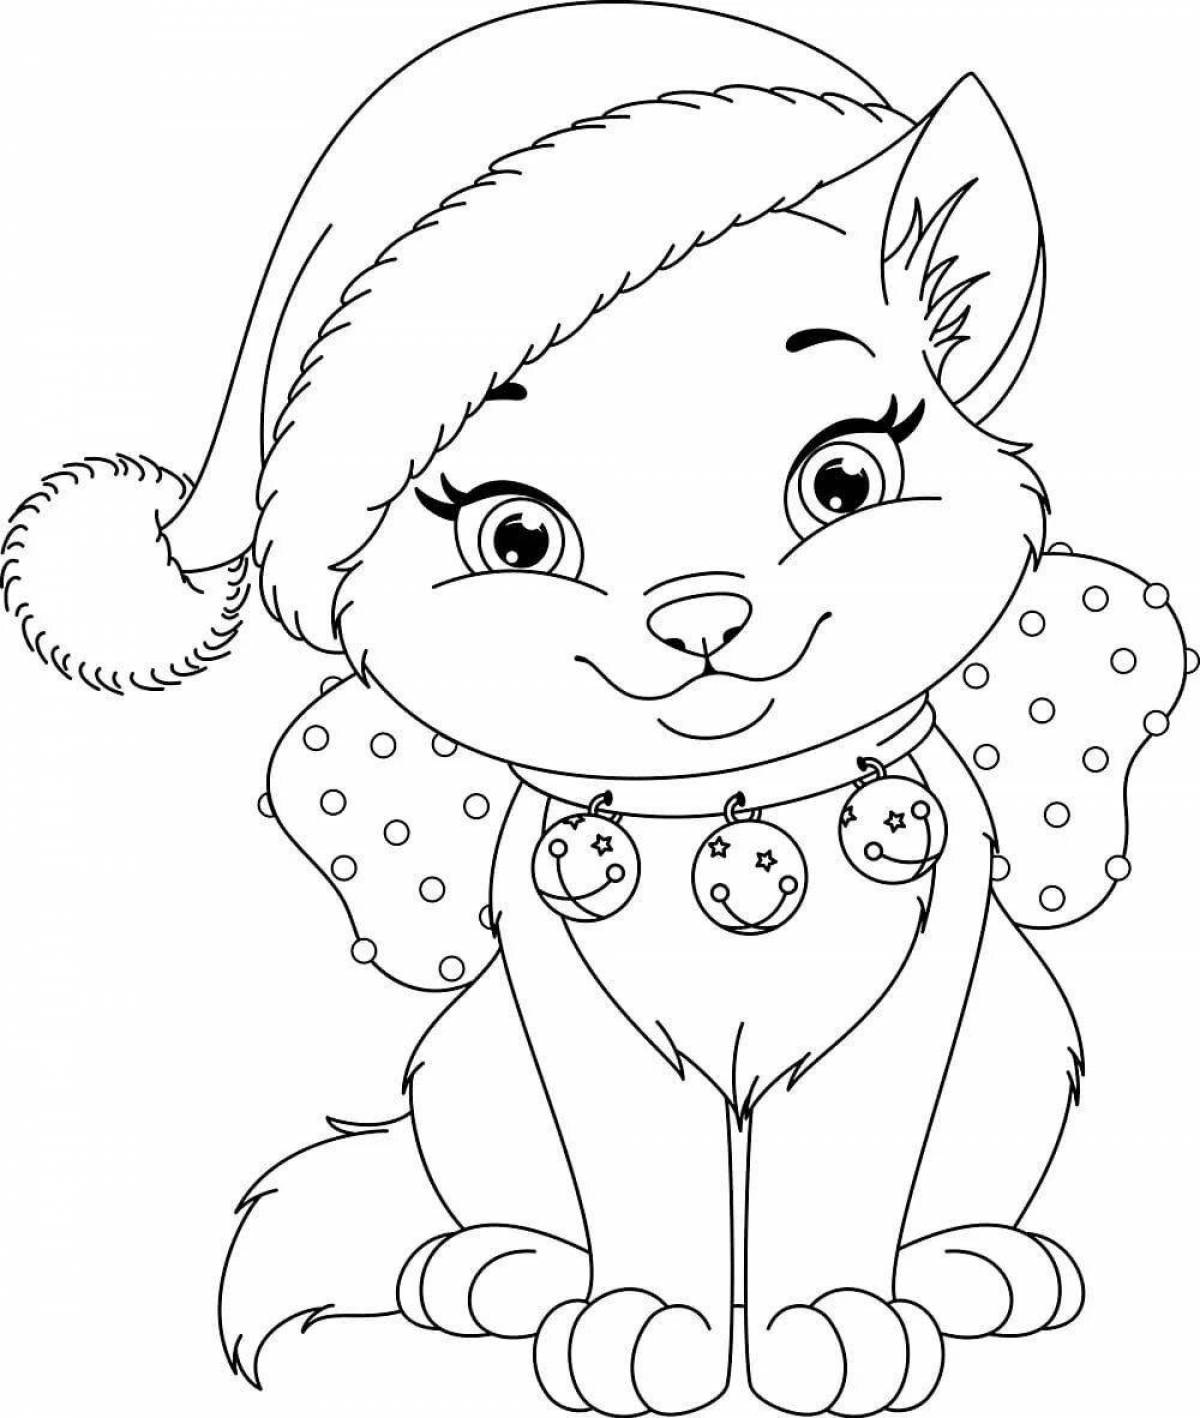 Sweet Christmas cats coloring book